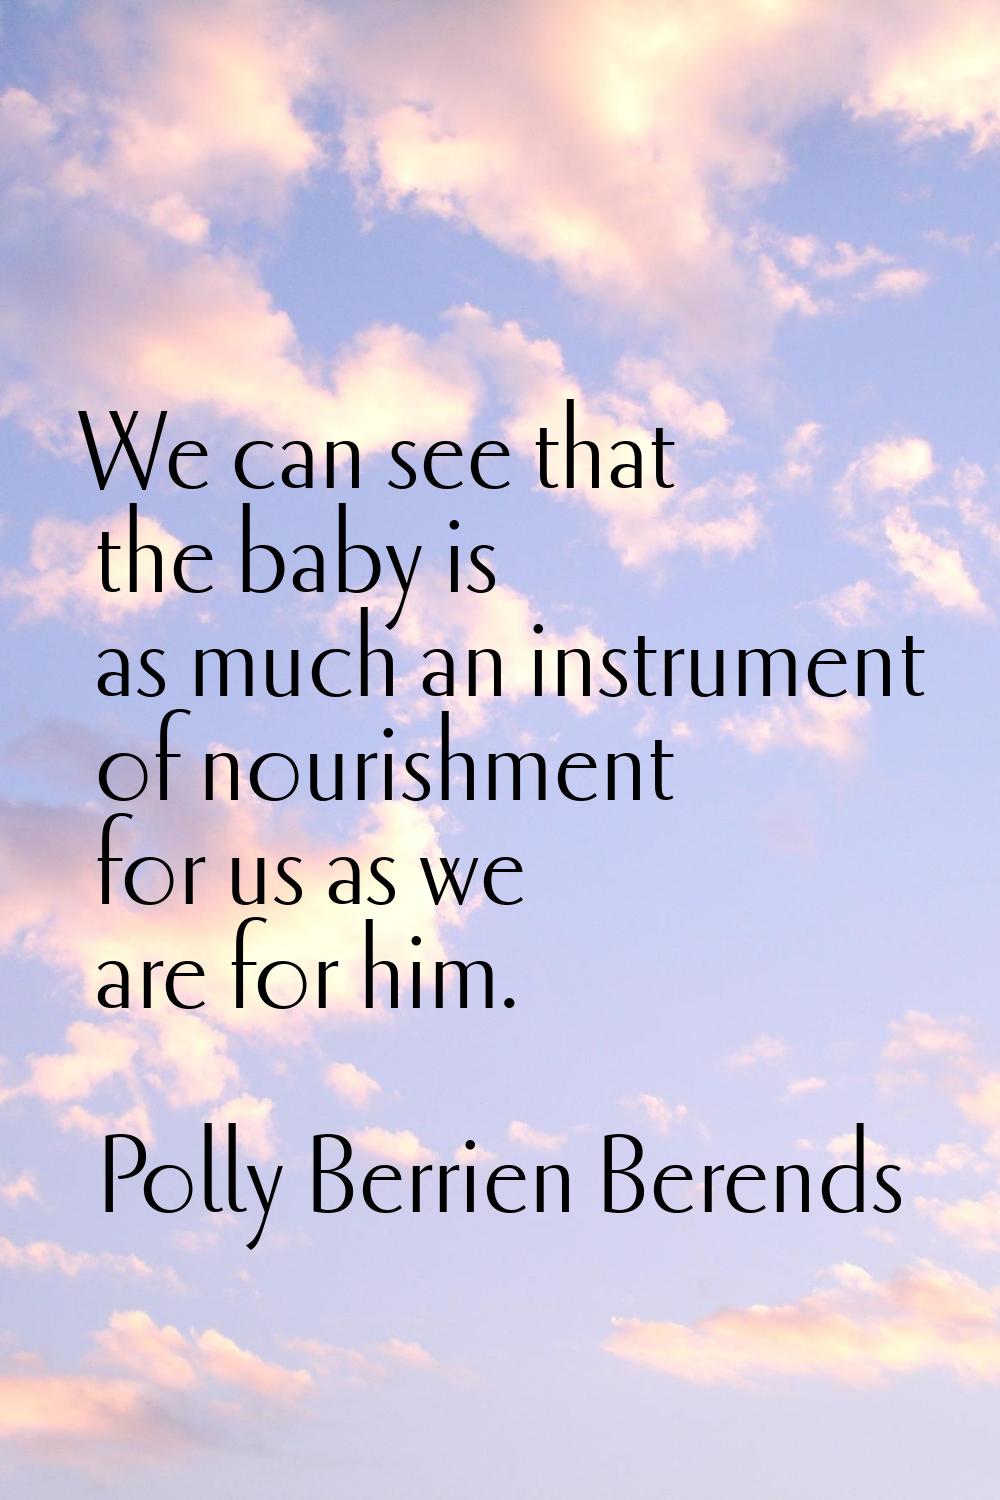 We can see that the baby is as much an instrument of nourishment for us as we are for him.